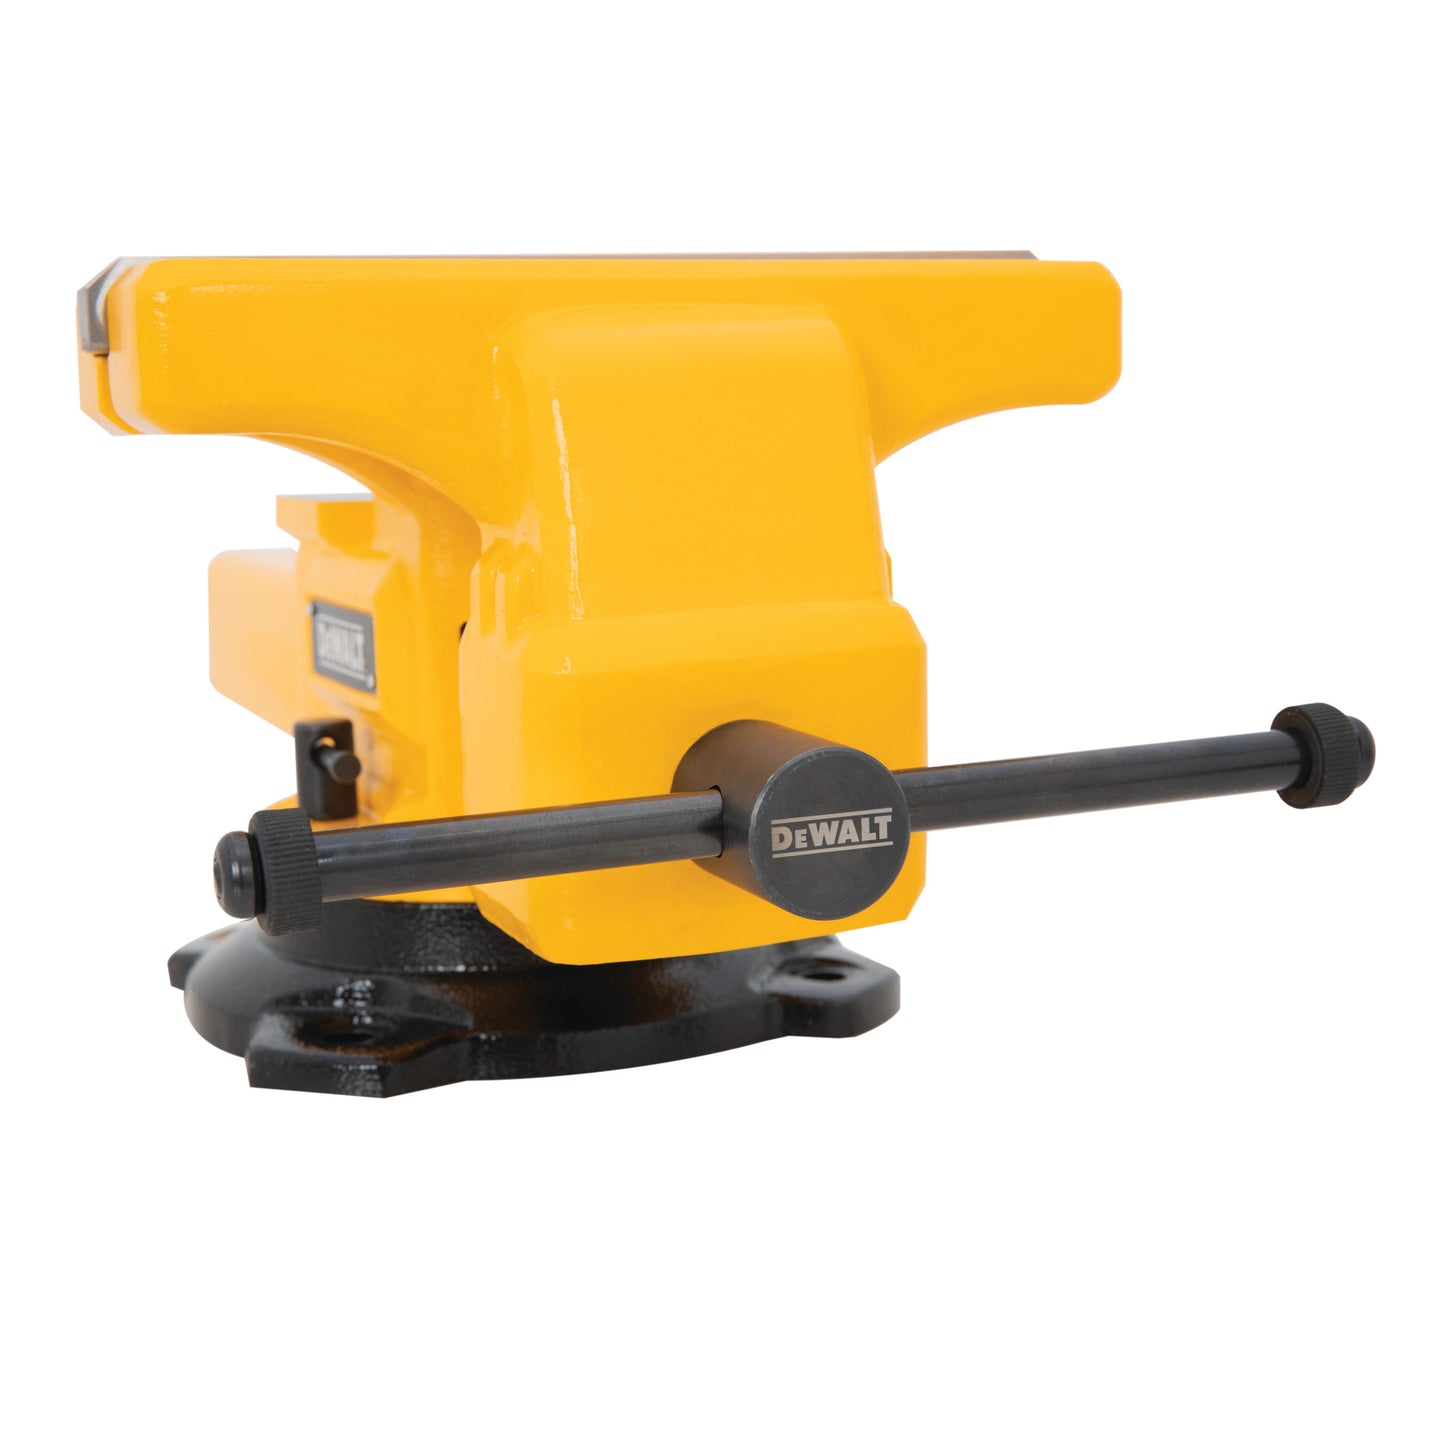 10-Inch 4400lb Capacity Bench Vise with Anvil in Yellow & Black